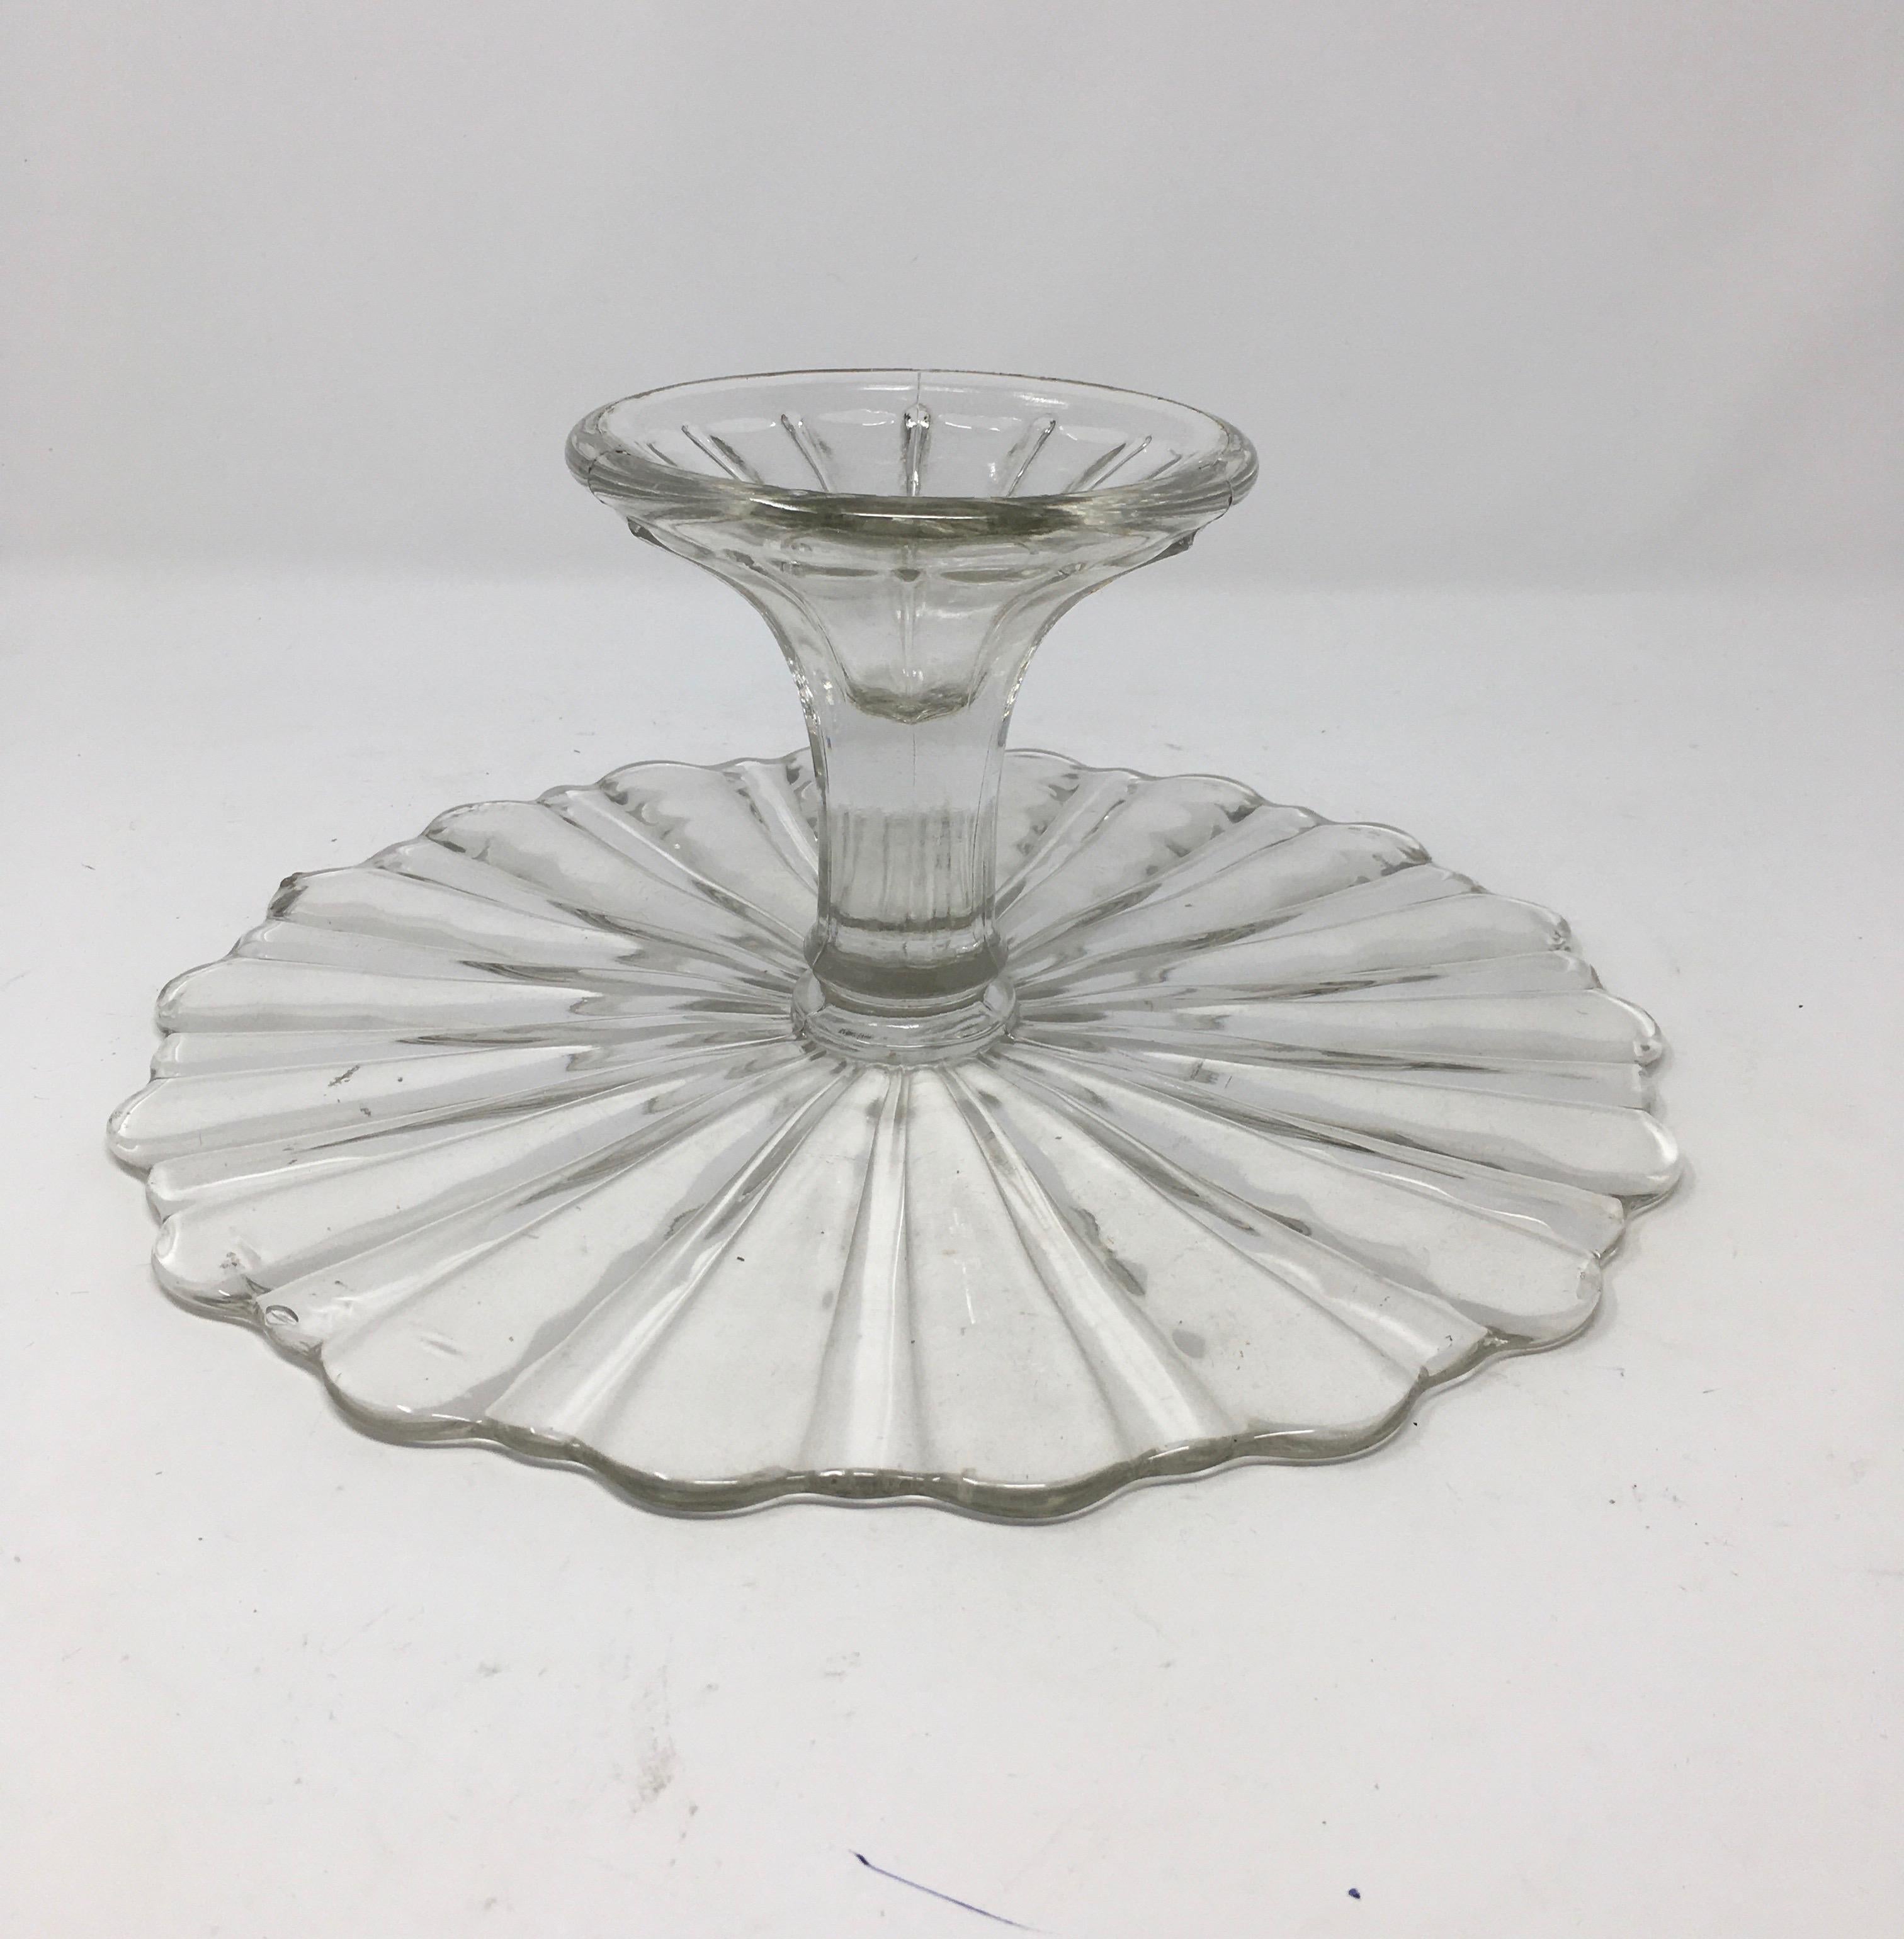 Other Antique Pedestal Glass Cake Patisserie Stand